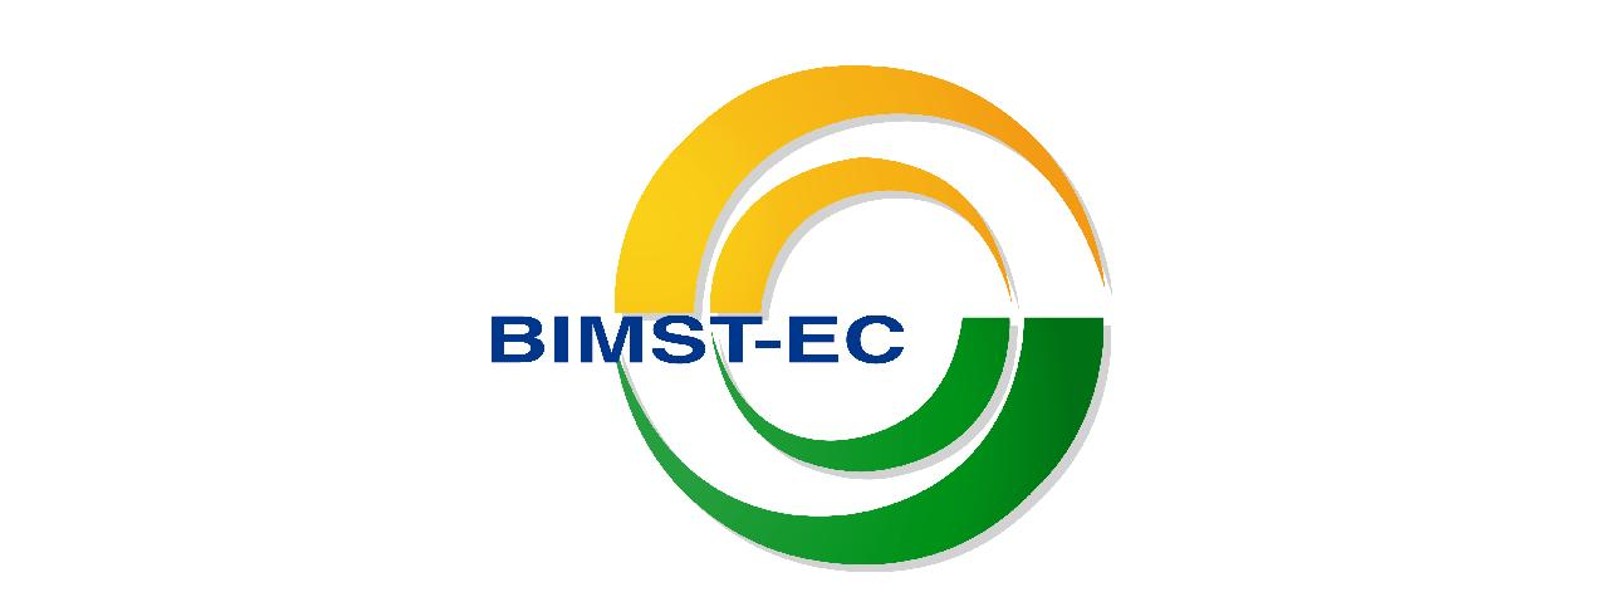 President to chair BIMSTEC Summit today (30)